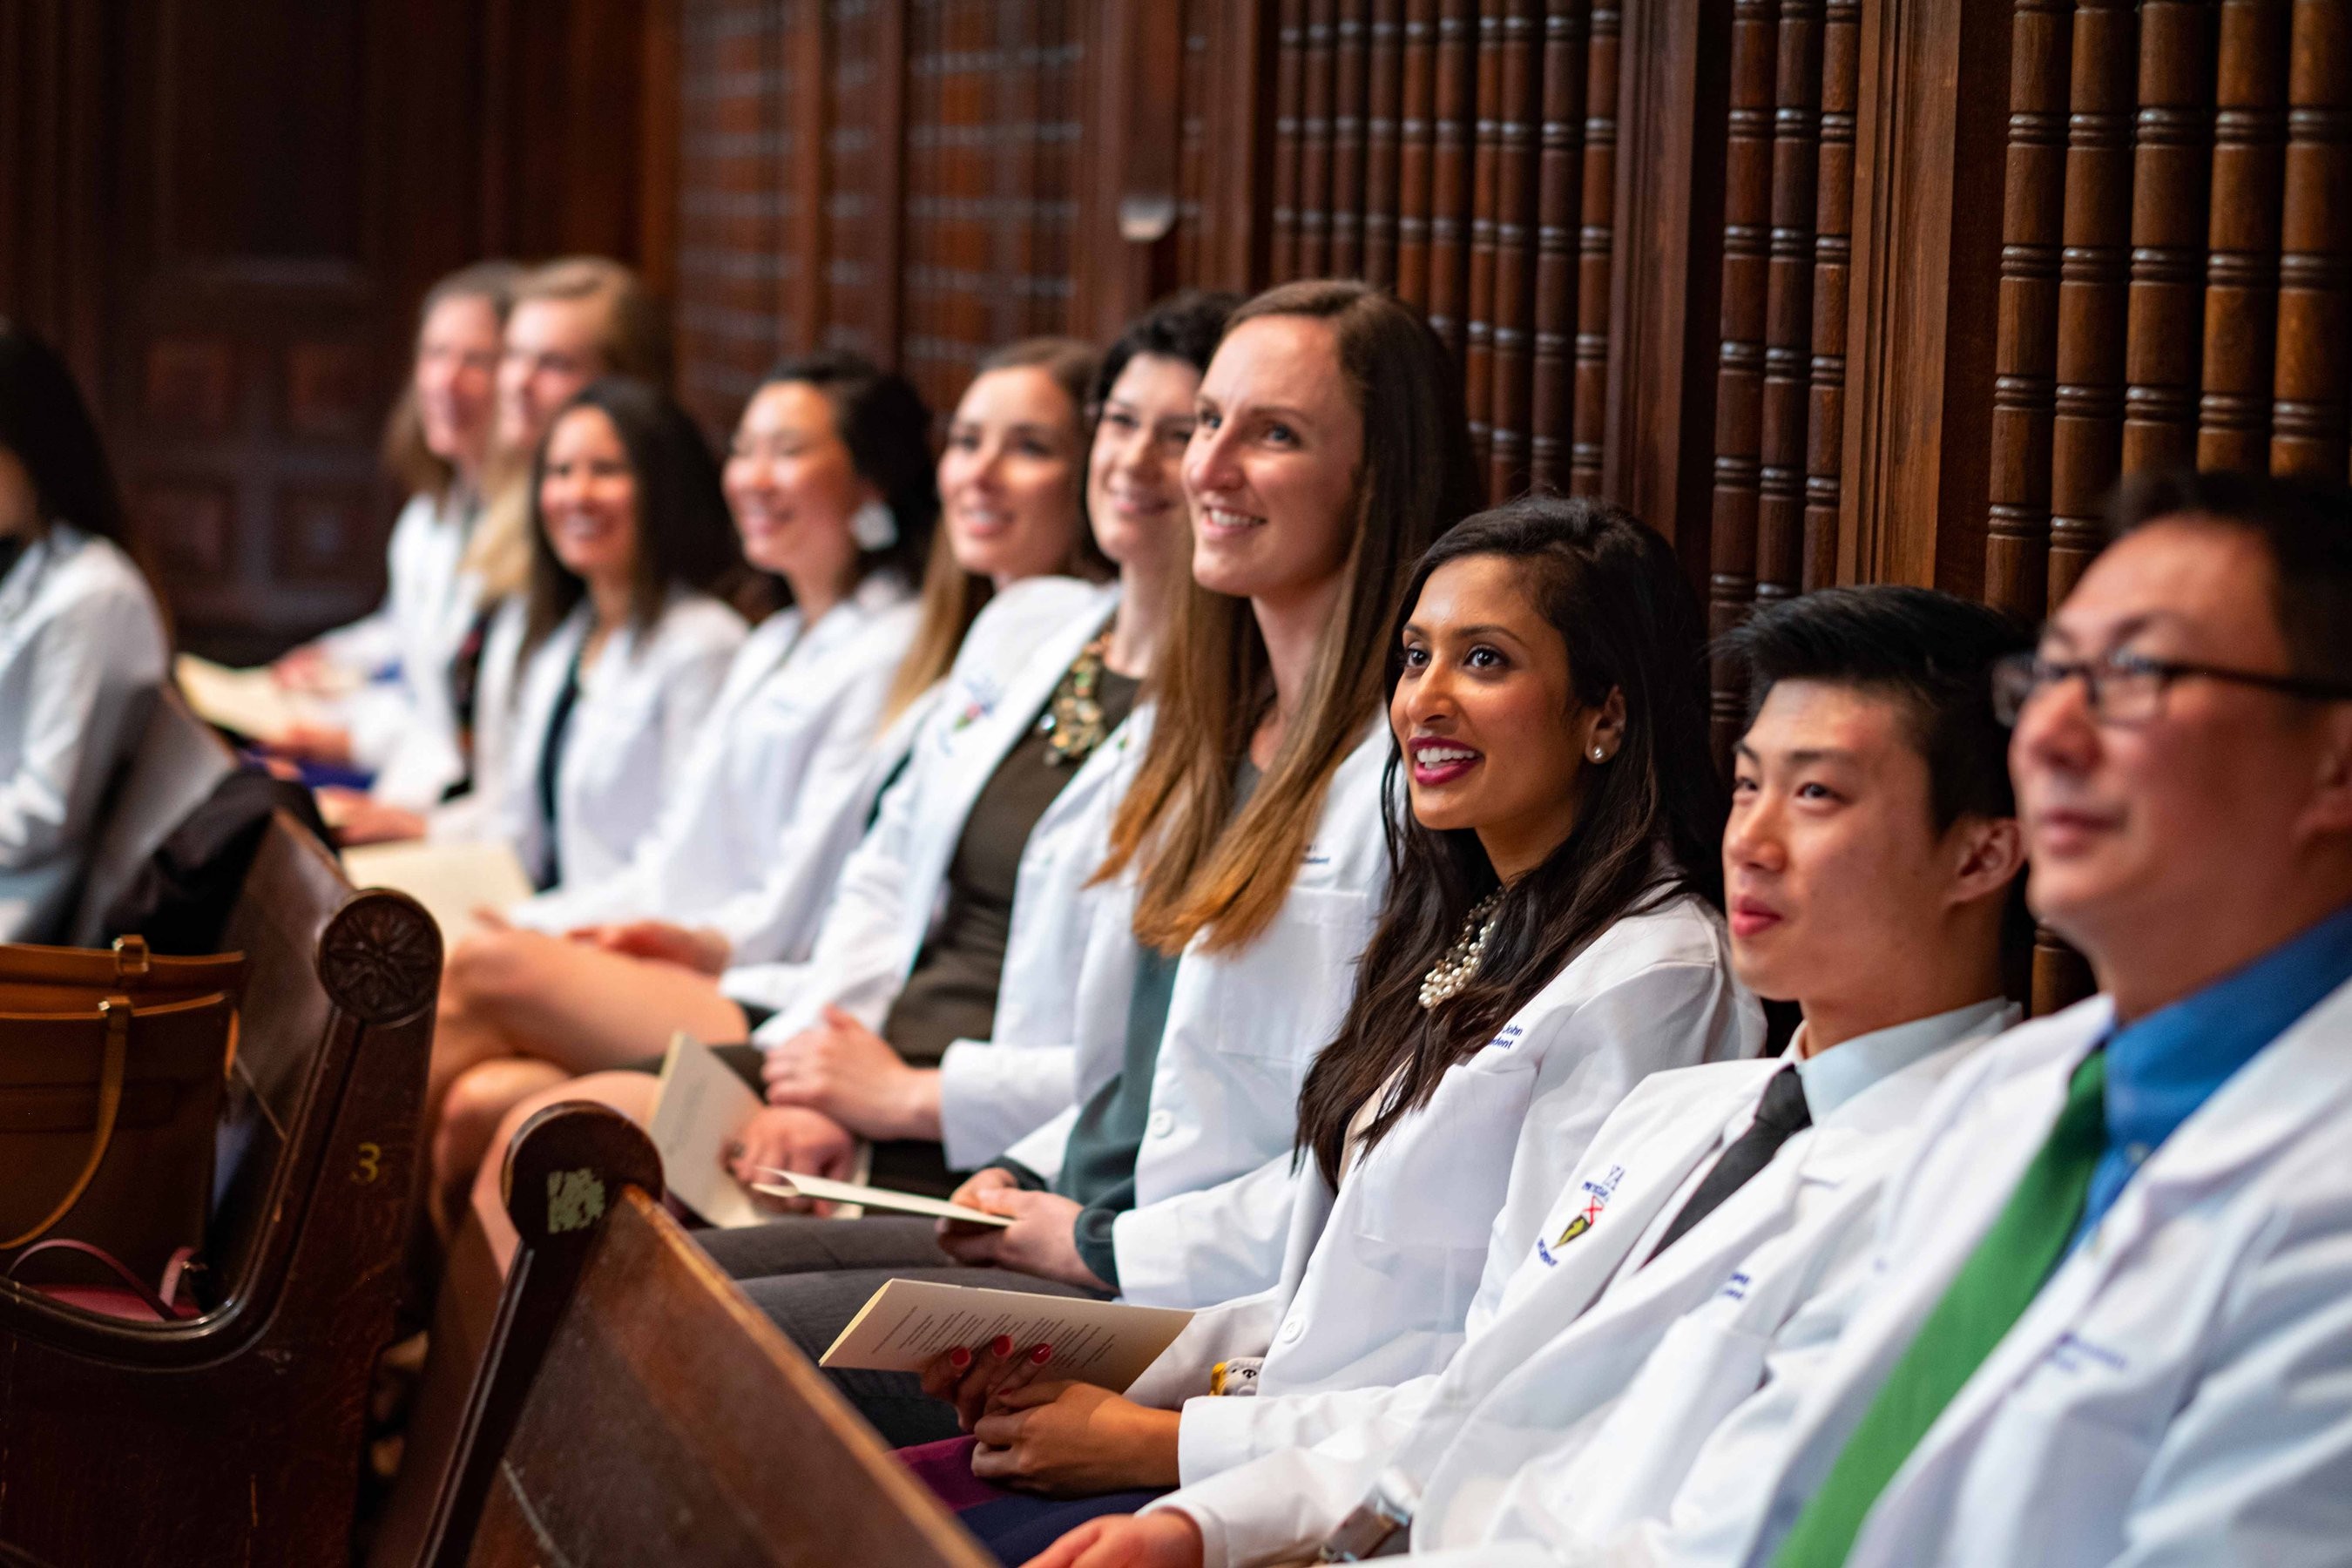 Students smiling and sitting at the white coat ceremony at medical school graduation